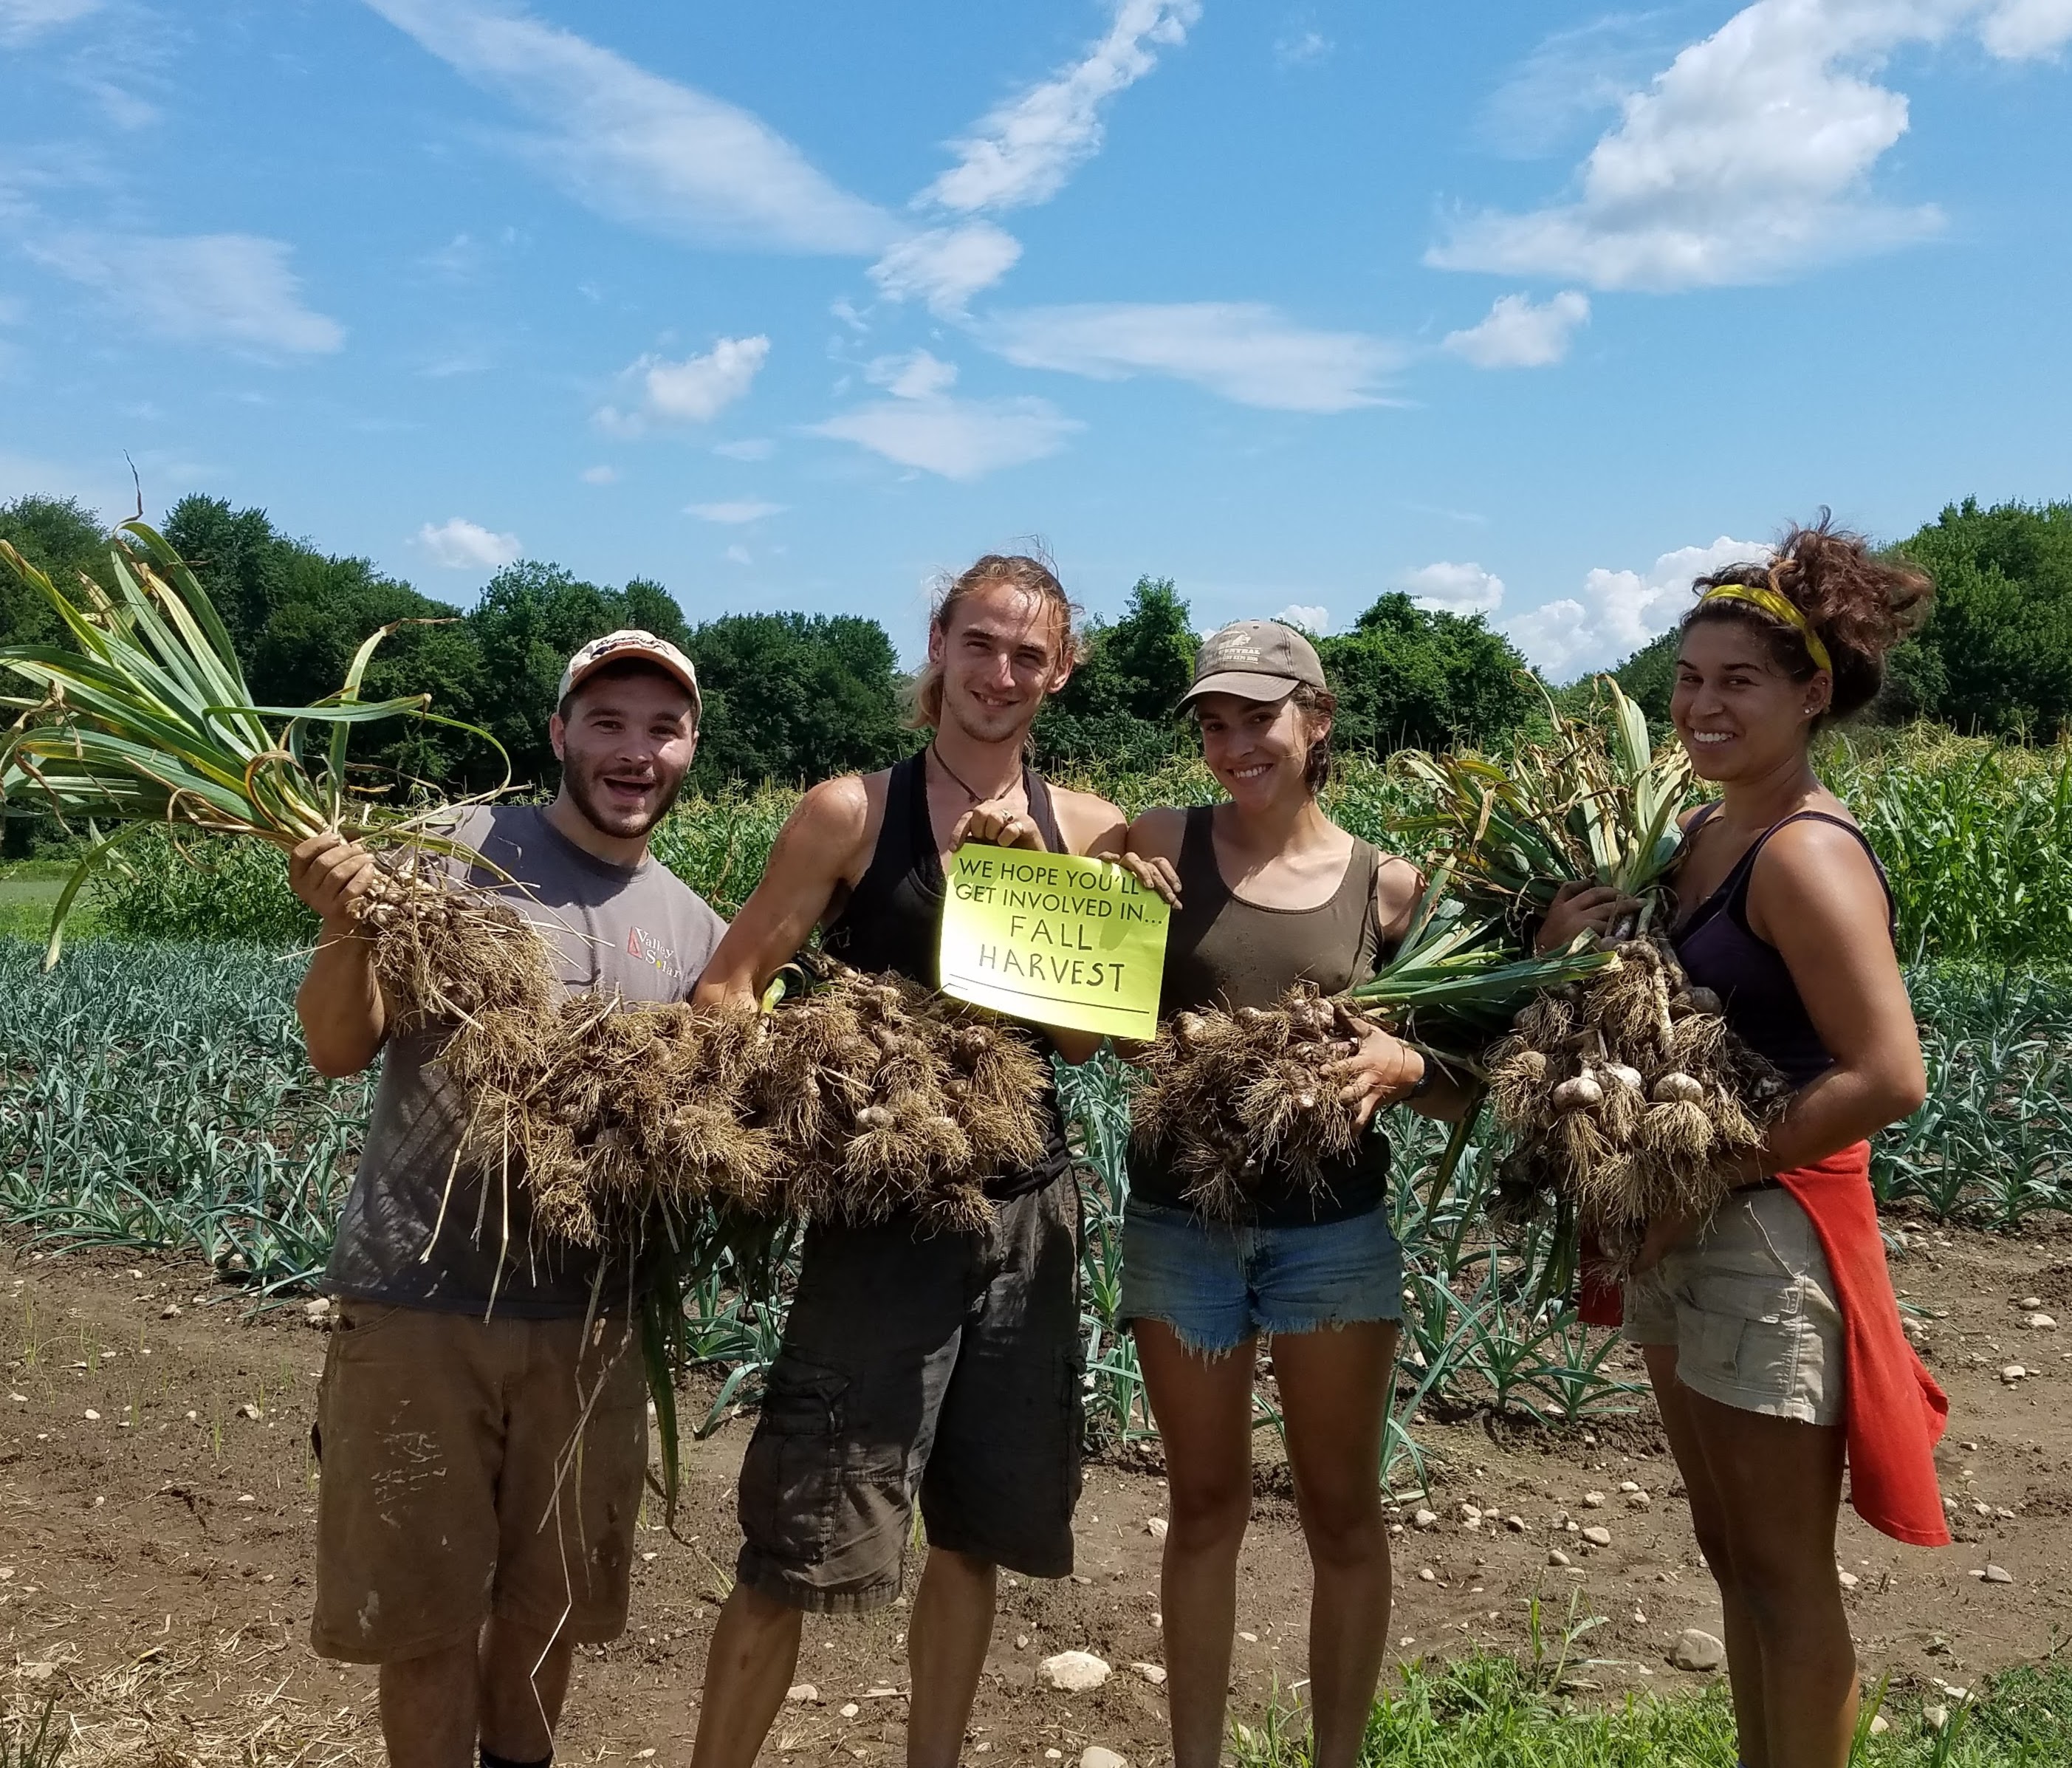 group of 4 people in a field holding garlic bunches and a sign that says "We hope you will jget involved infall harvest"